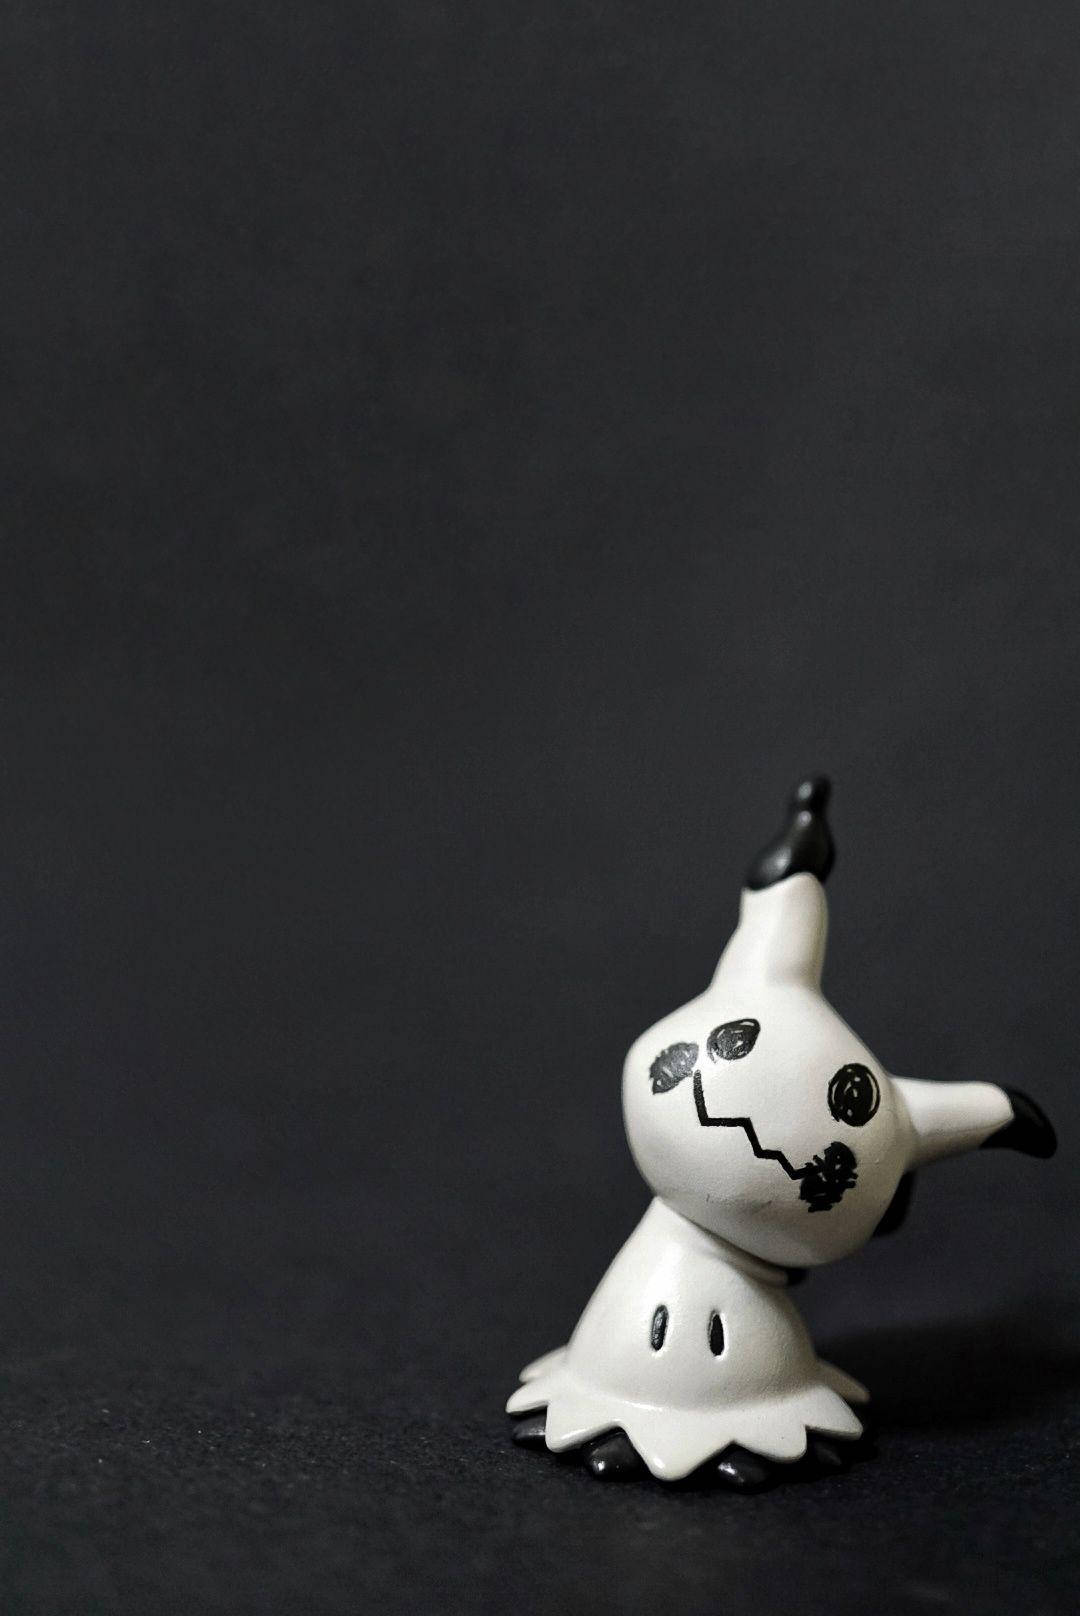 A Small Figurine Of A Ghost Sitting On A Black Surface Wallpaper